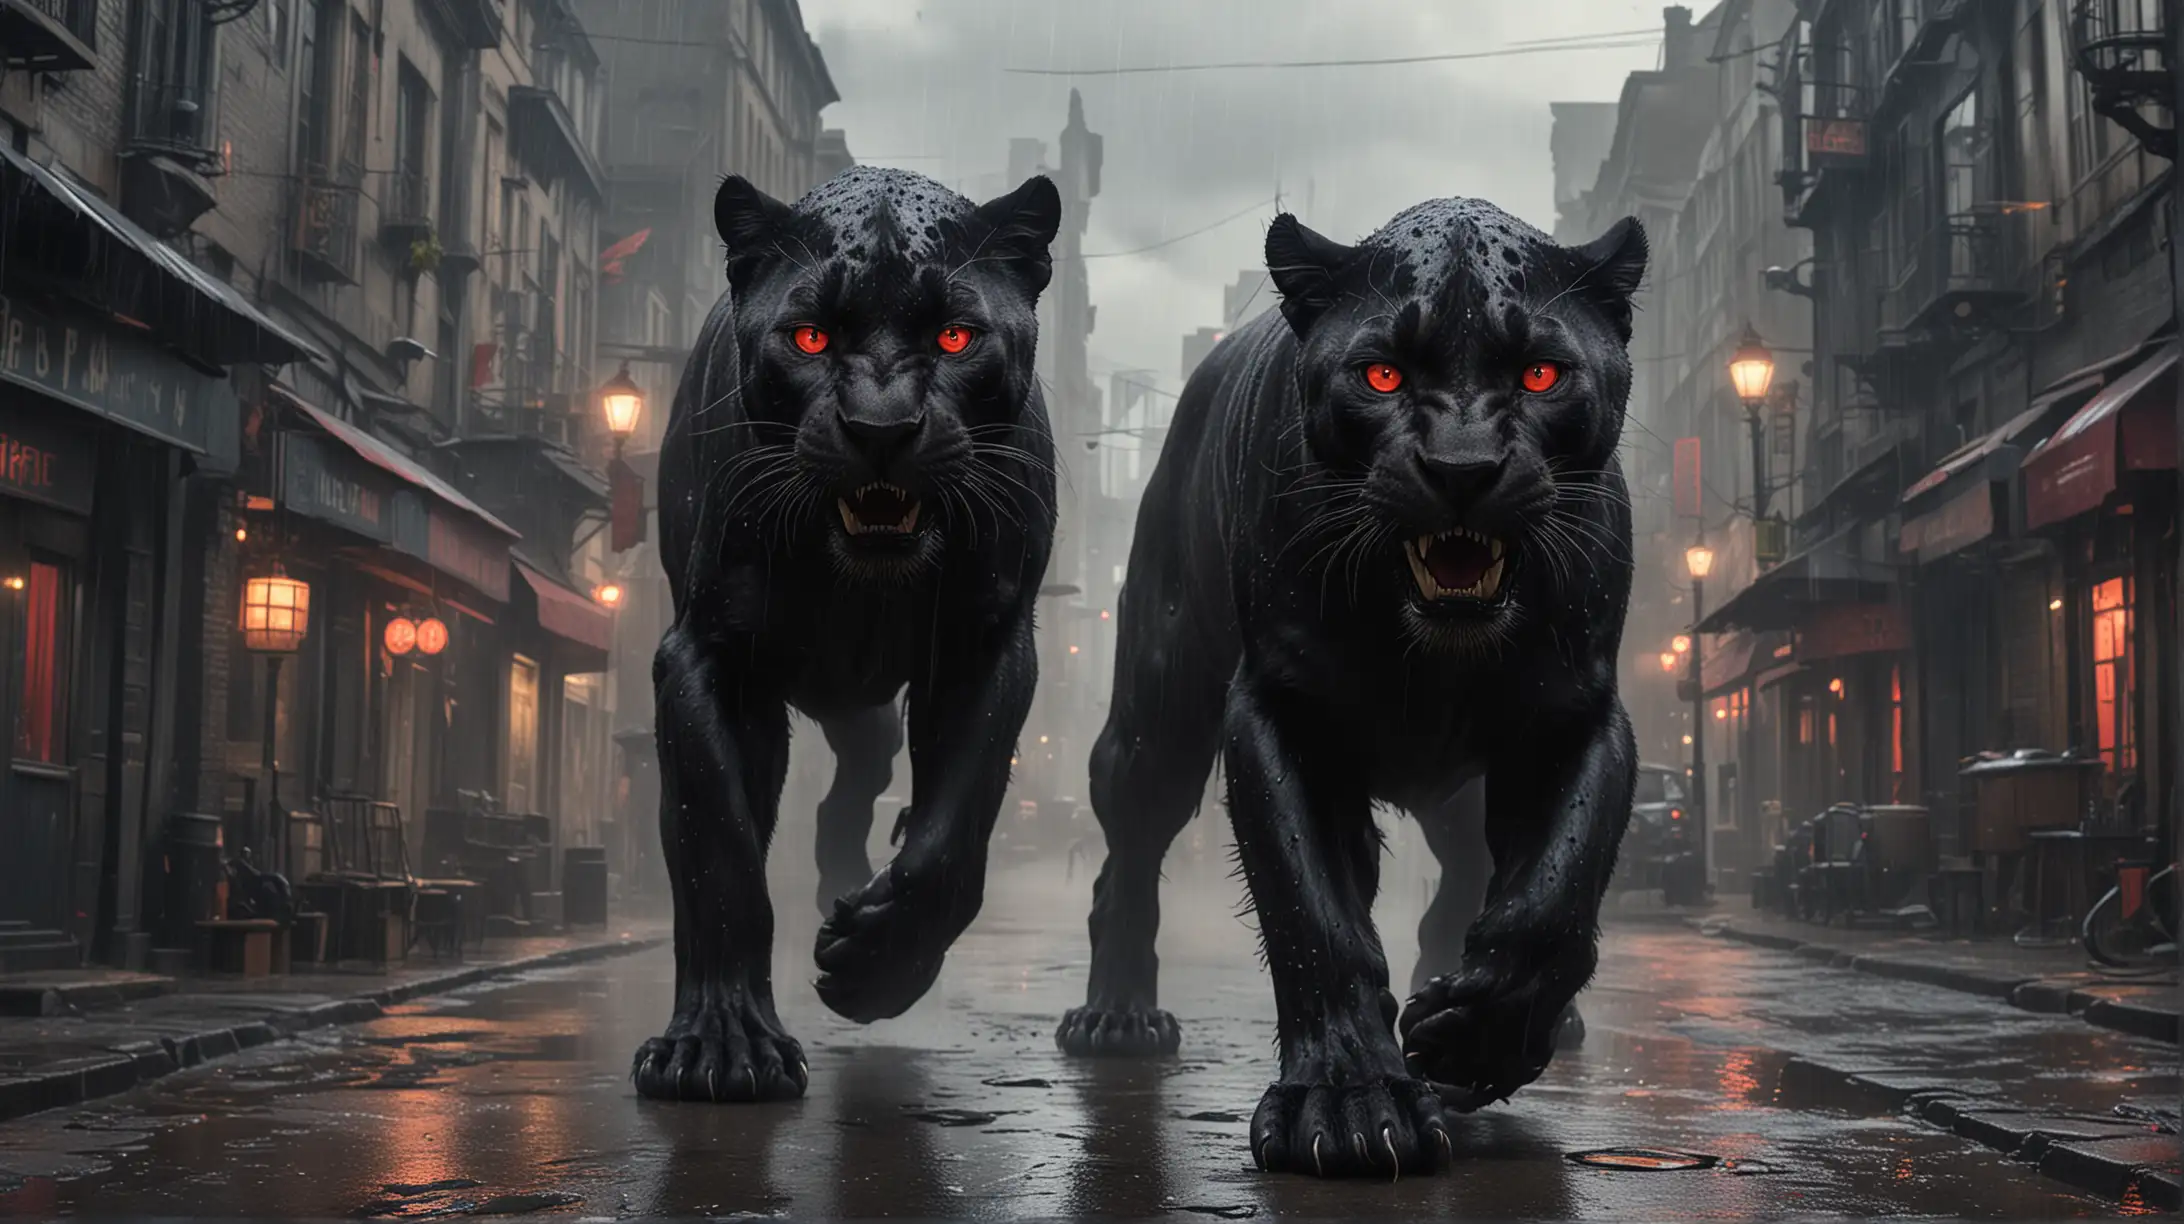 a black panther with red eyes and teeth alone in a street of a steampunk city, dark, cloudy, heavy rain